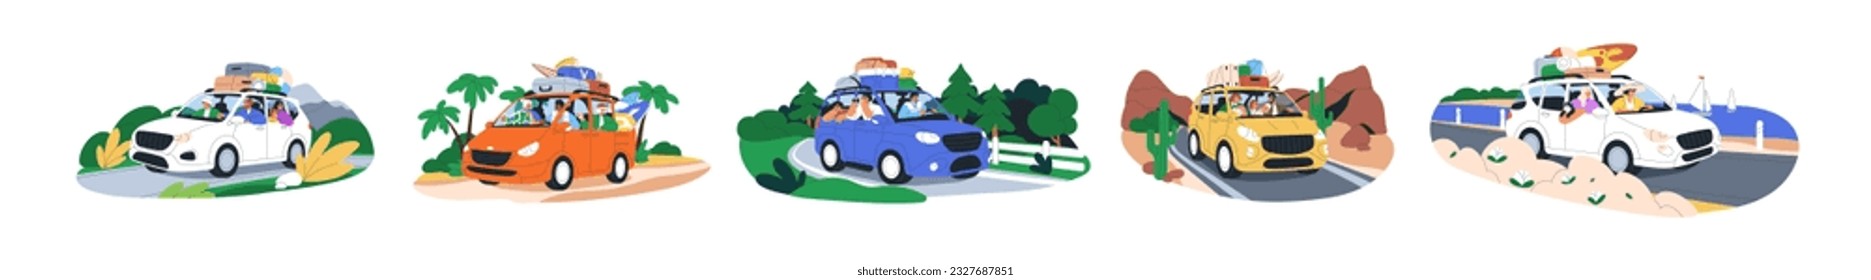 Happy families, friends travel by car, van. Road trip, journey on summer holiday set. People in auto adventure, driving to sea, nature at weekend. Flat vector illustration isolated on white background